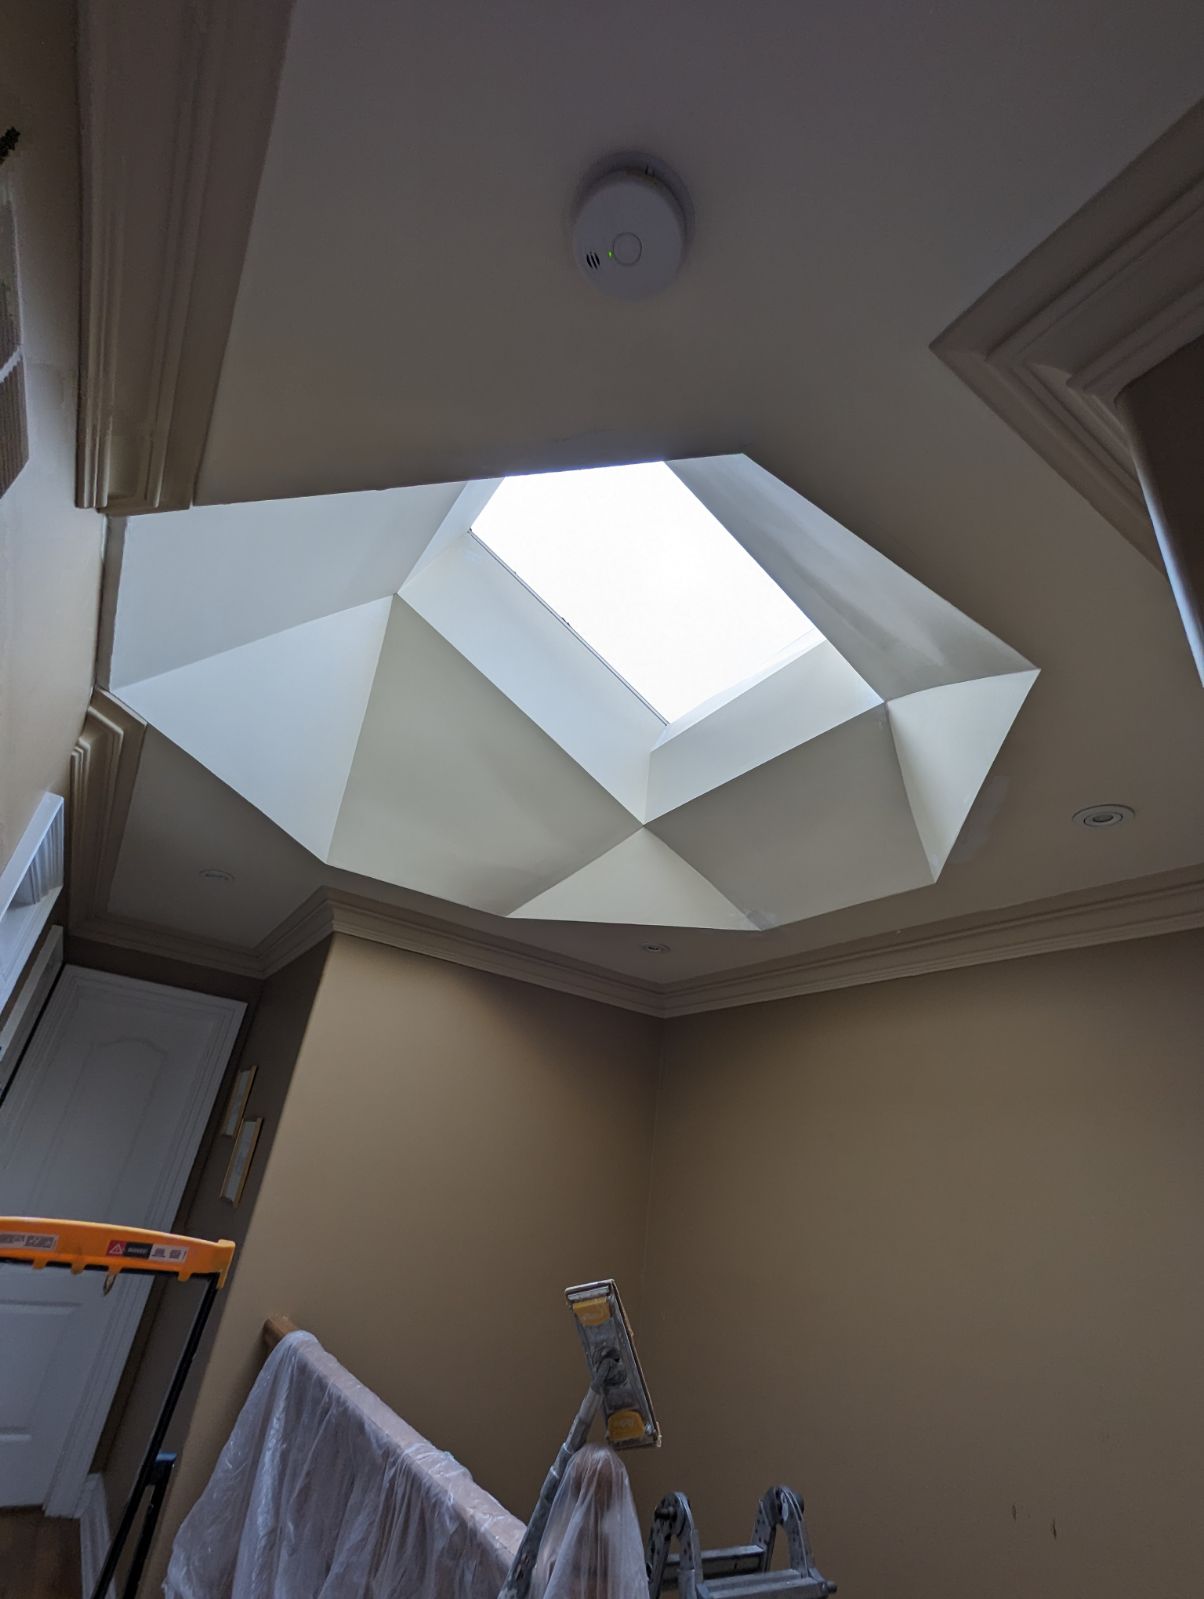 interior skylight after repair and painting